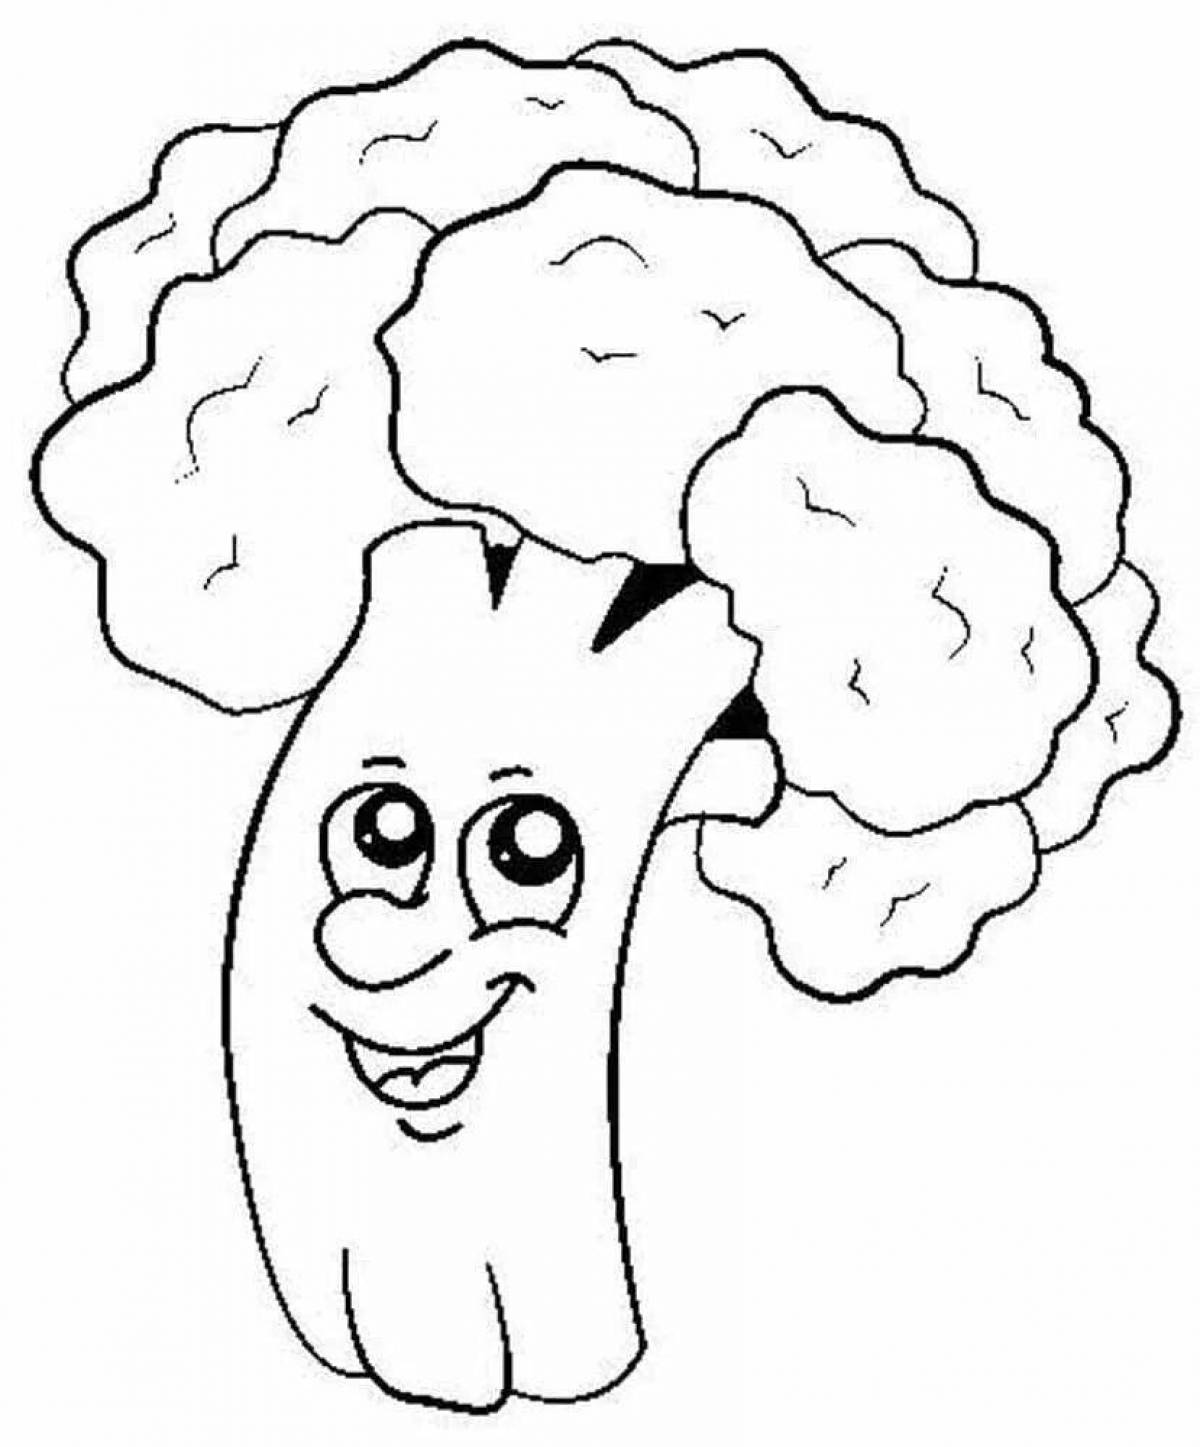 Colorful broccoli coloring book for kids